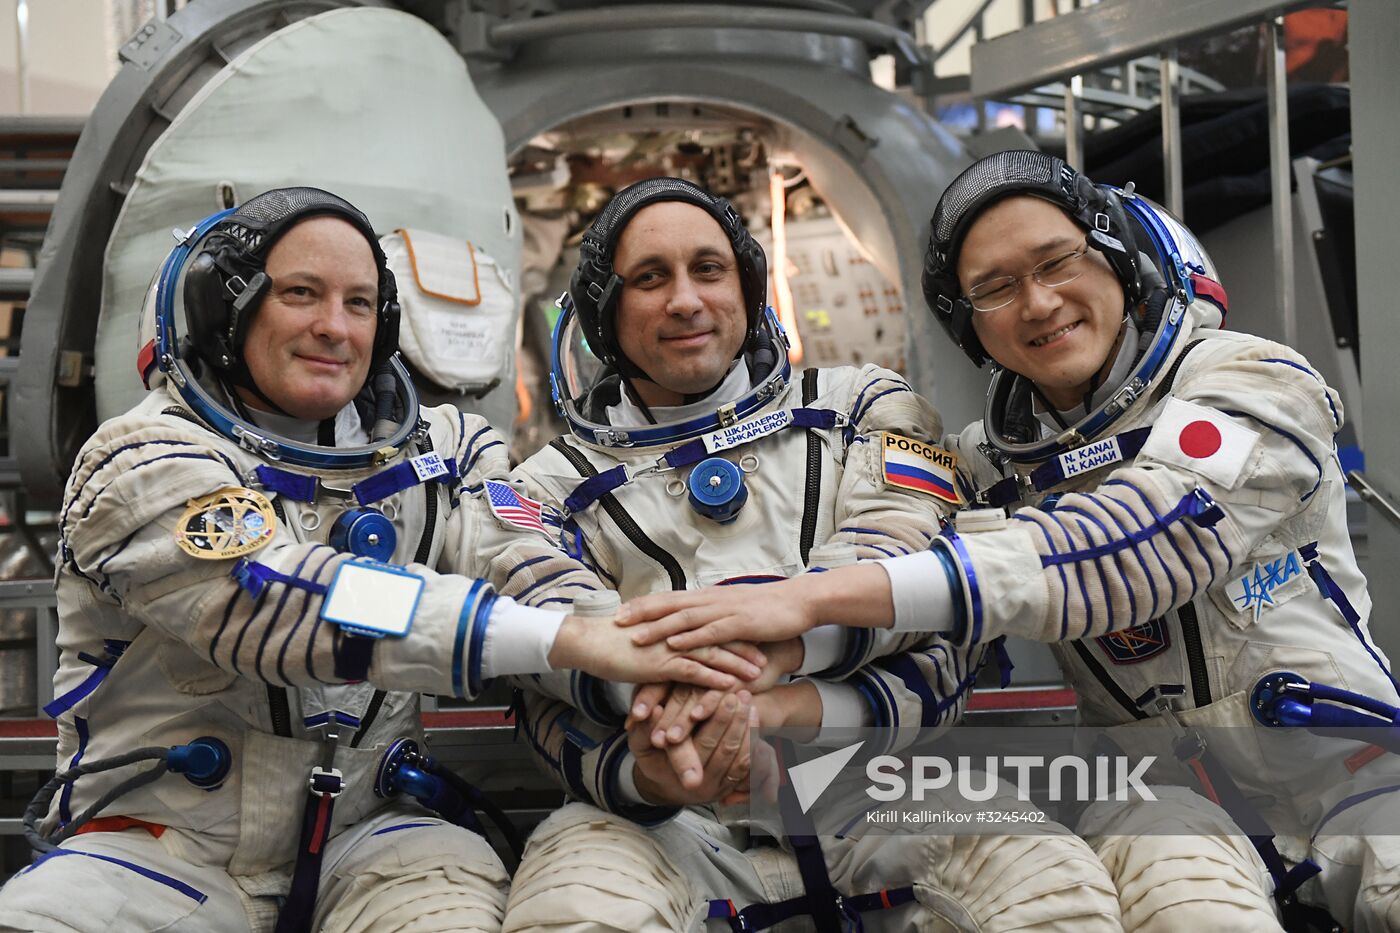 Crew training ahead of long-term Expedition 54/55